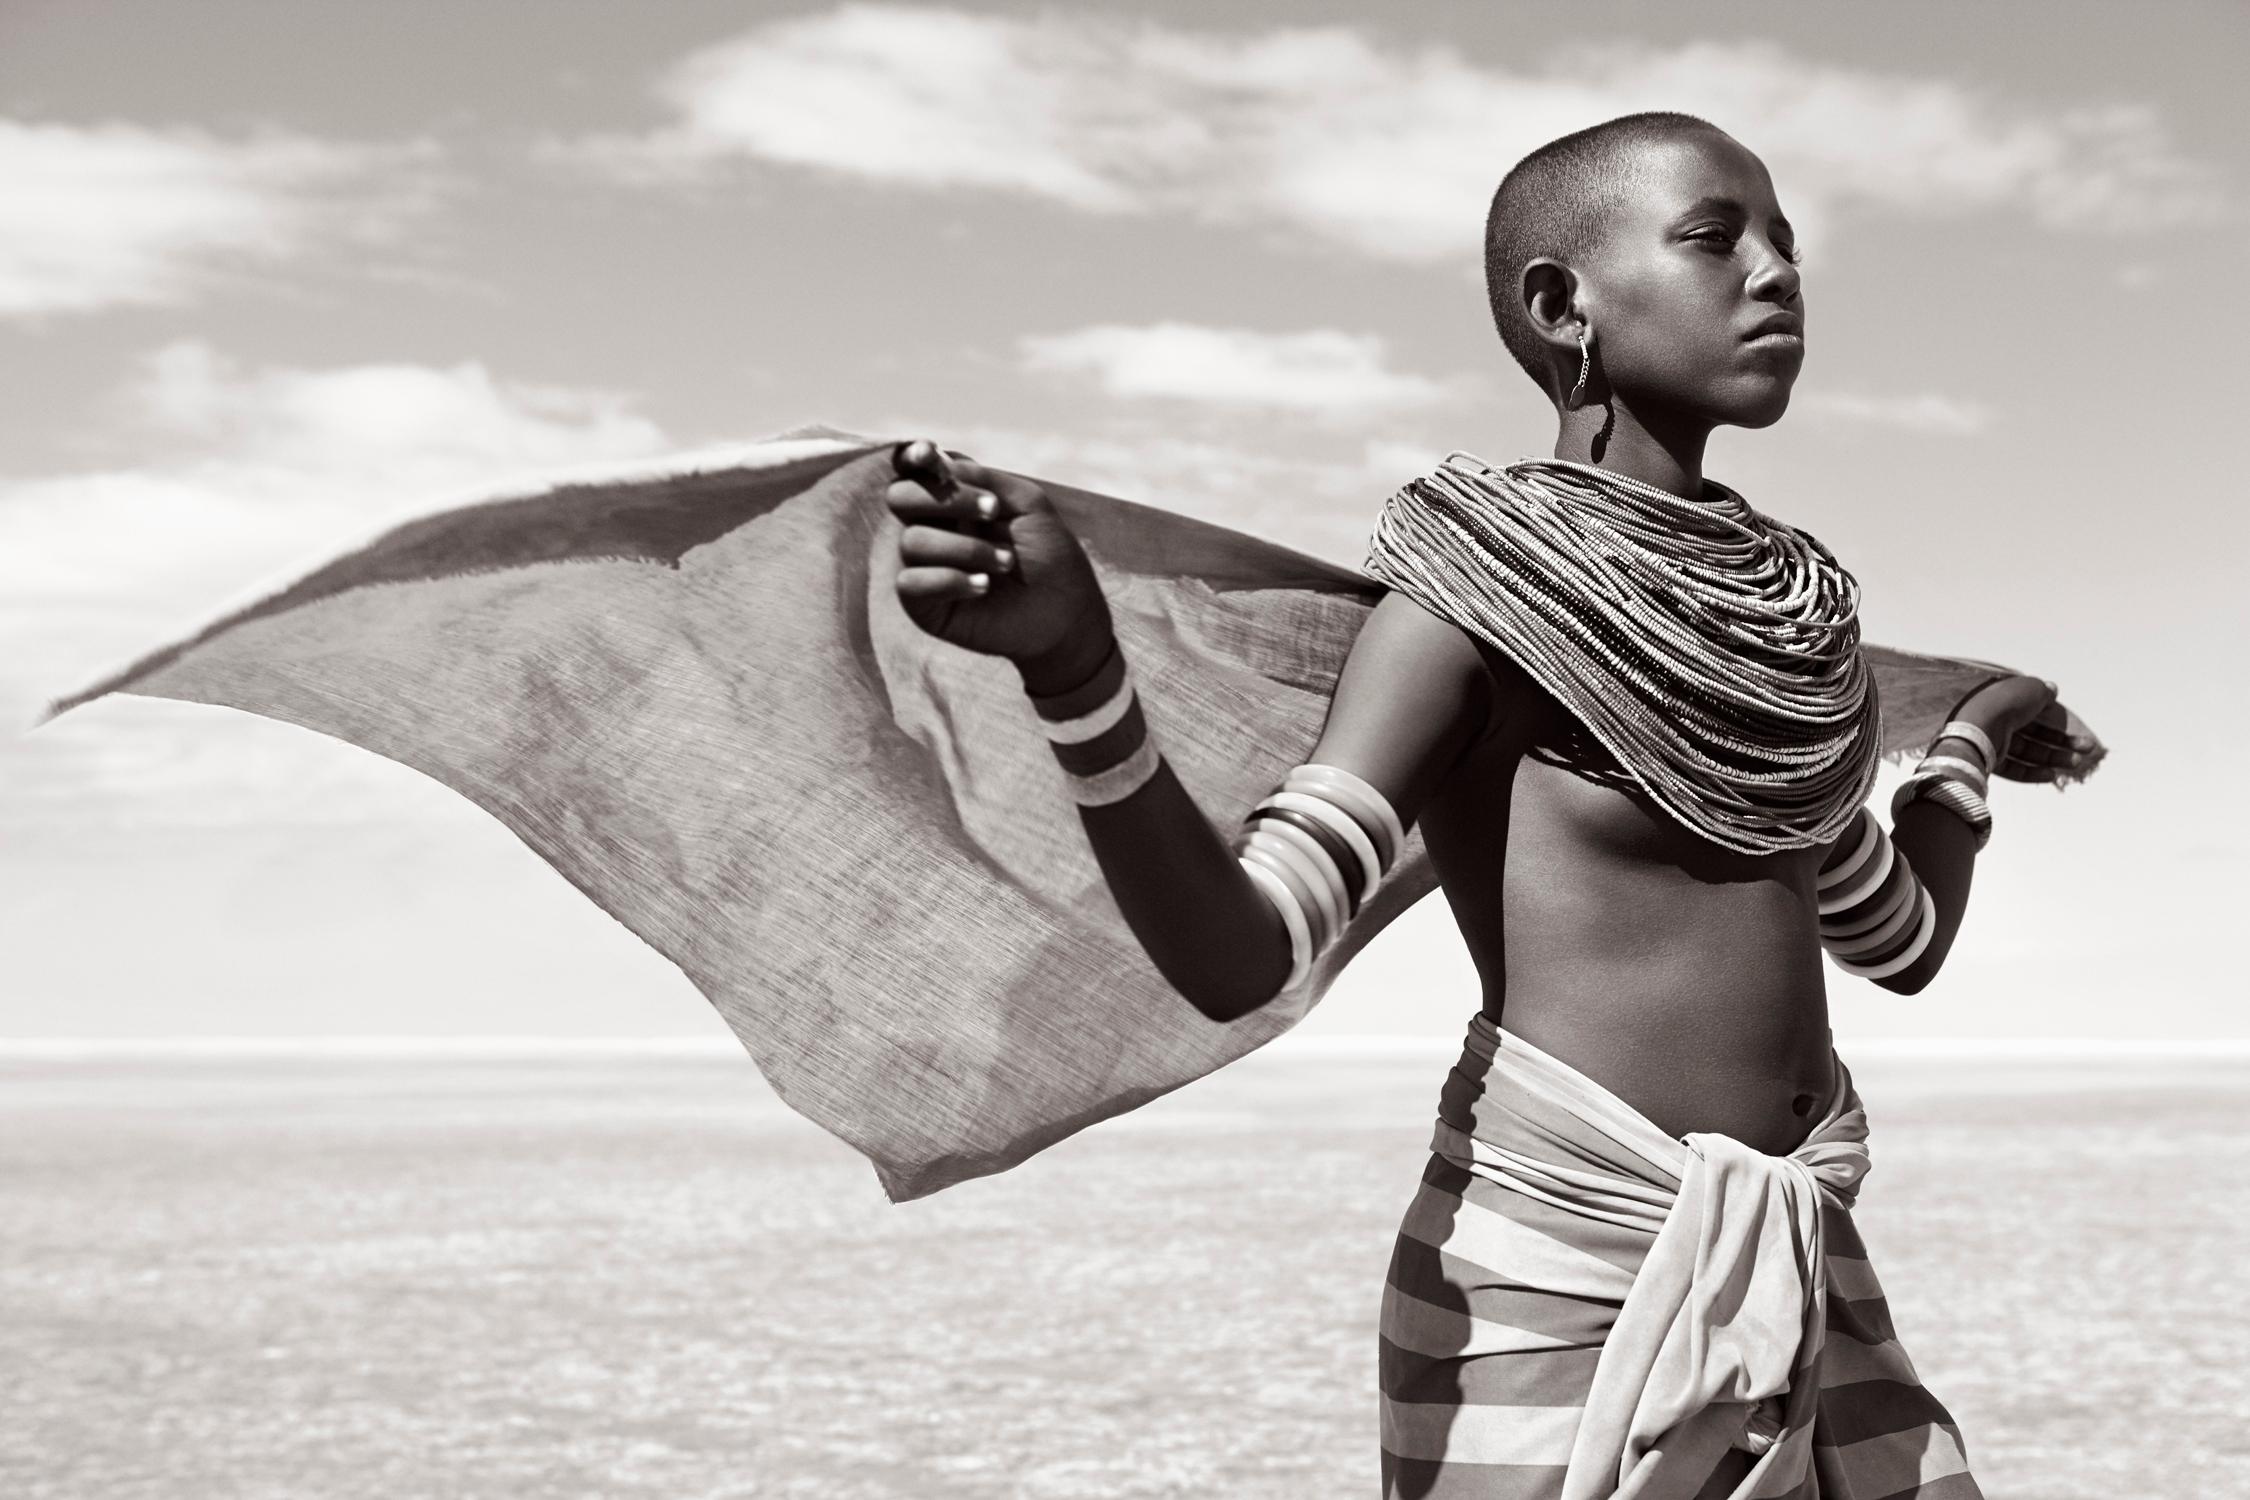 Drew Doggett Black and White Photograph - Adato, a young Rendille woman, is featured in this fashion-inspired portrait